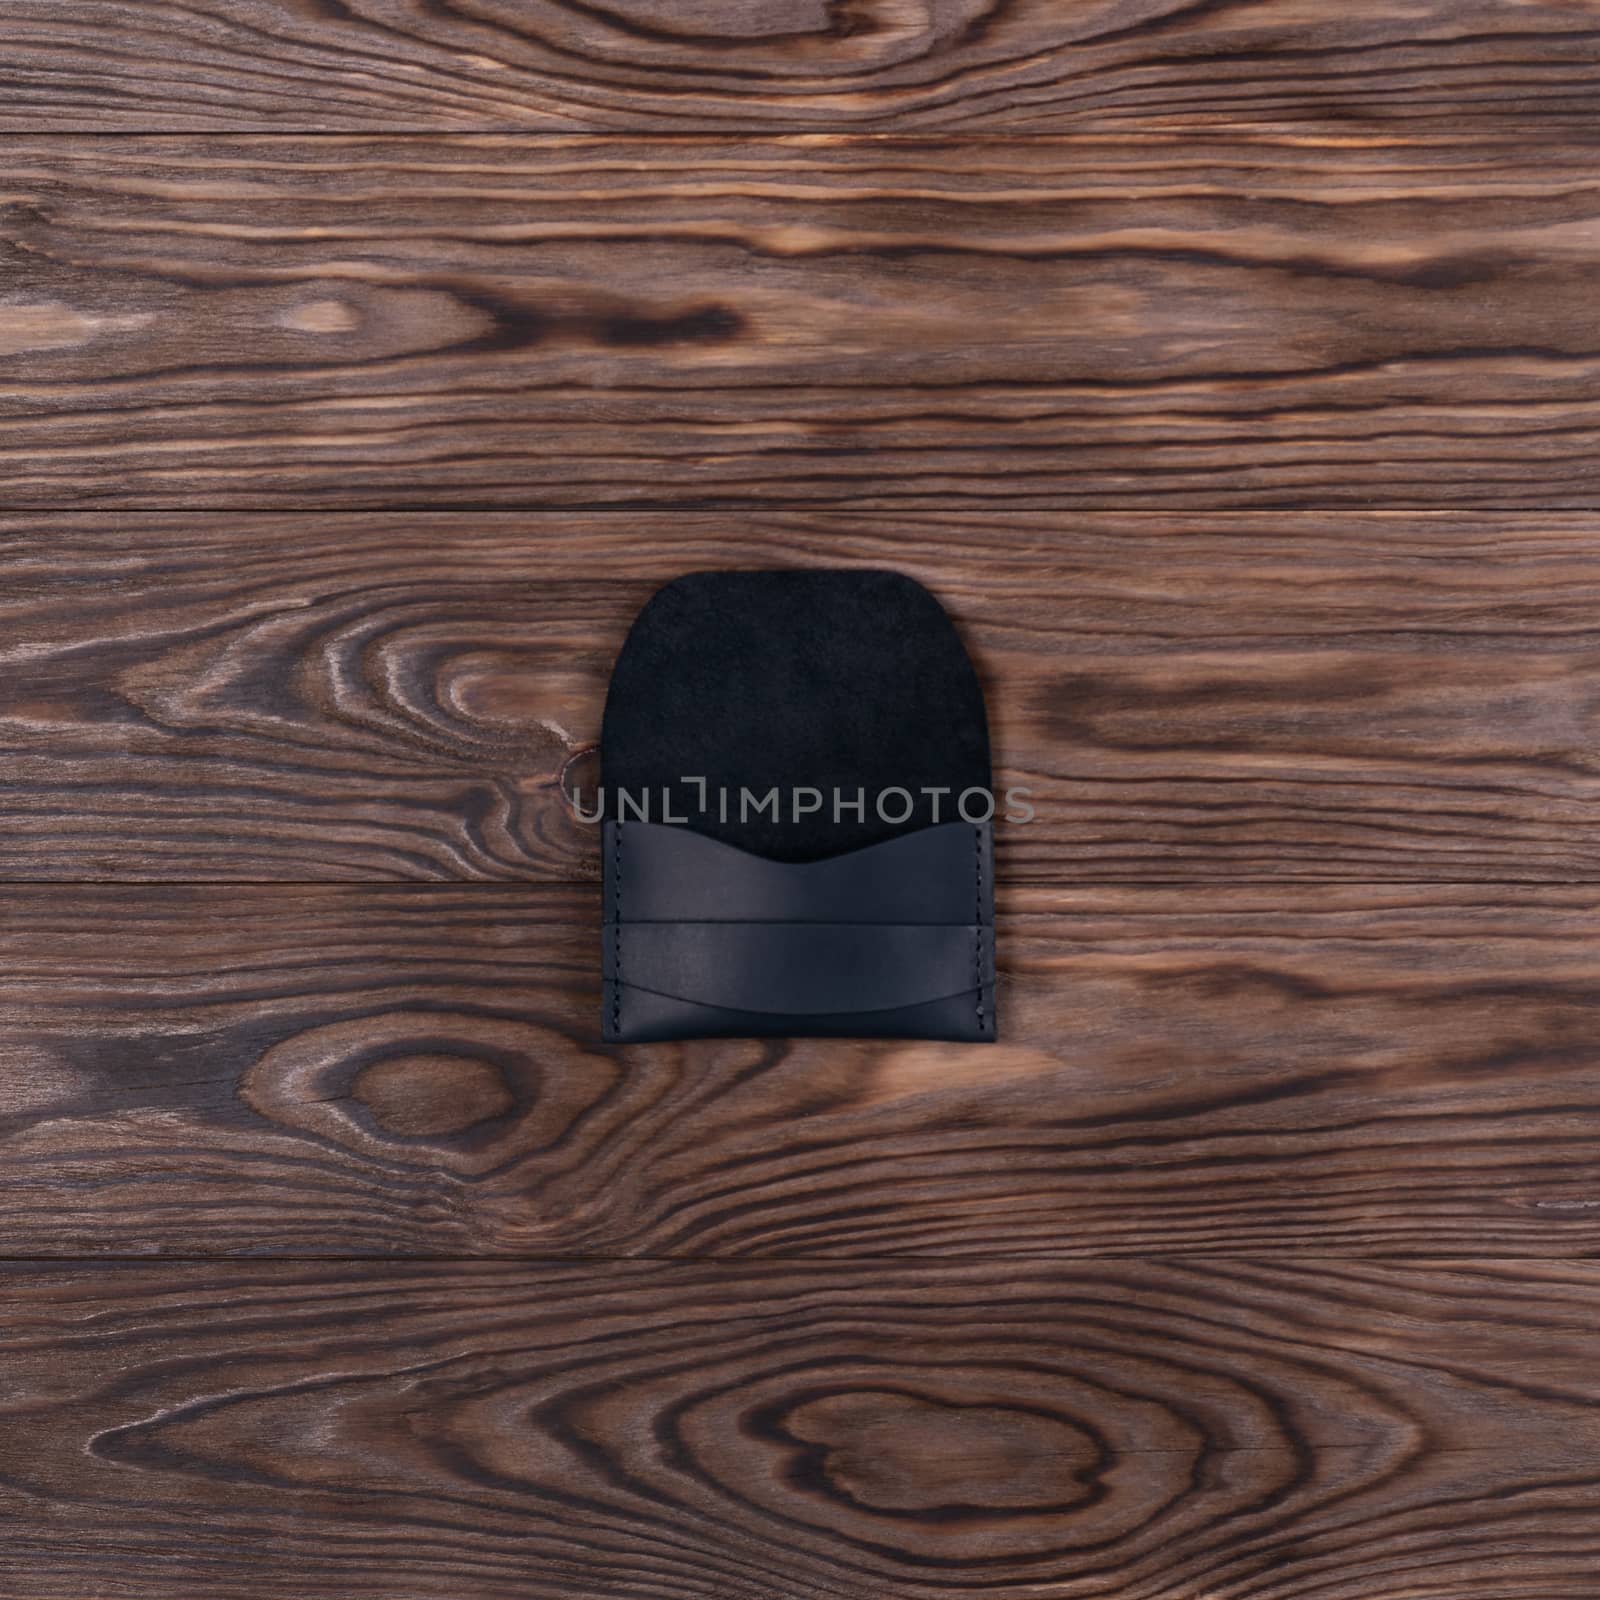 Flat lay photo of black colour handmade leather one pocket cardholder. Stock photo on wooden background. by alexsdriver